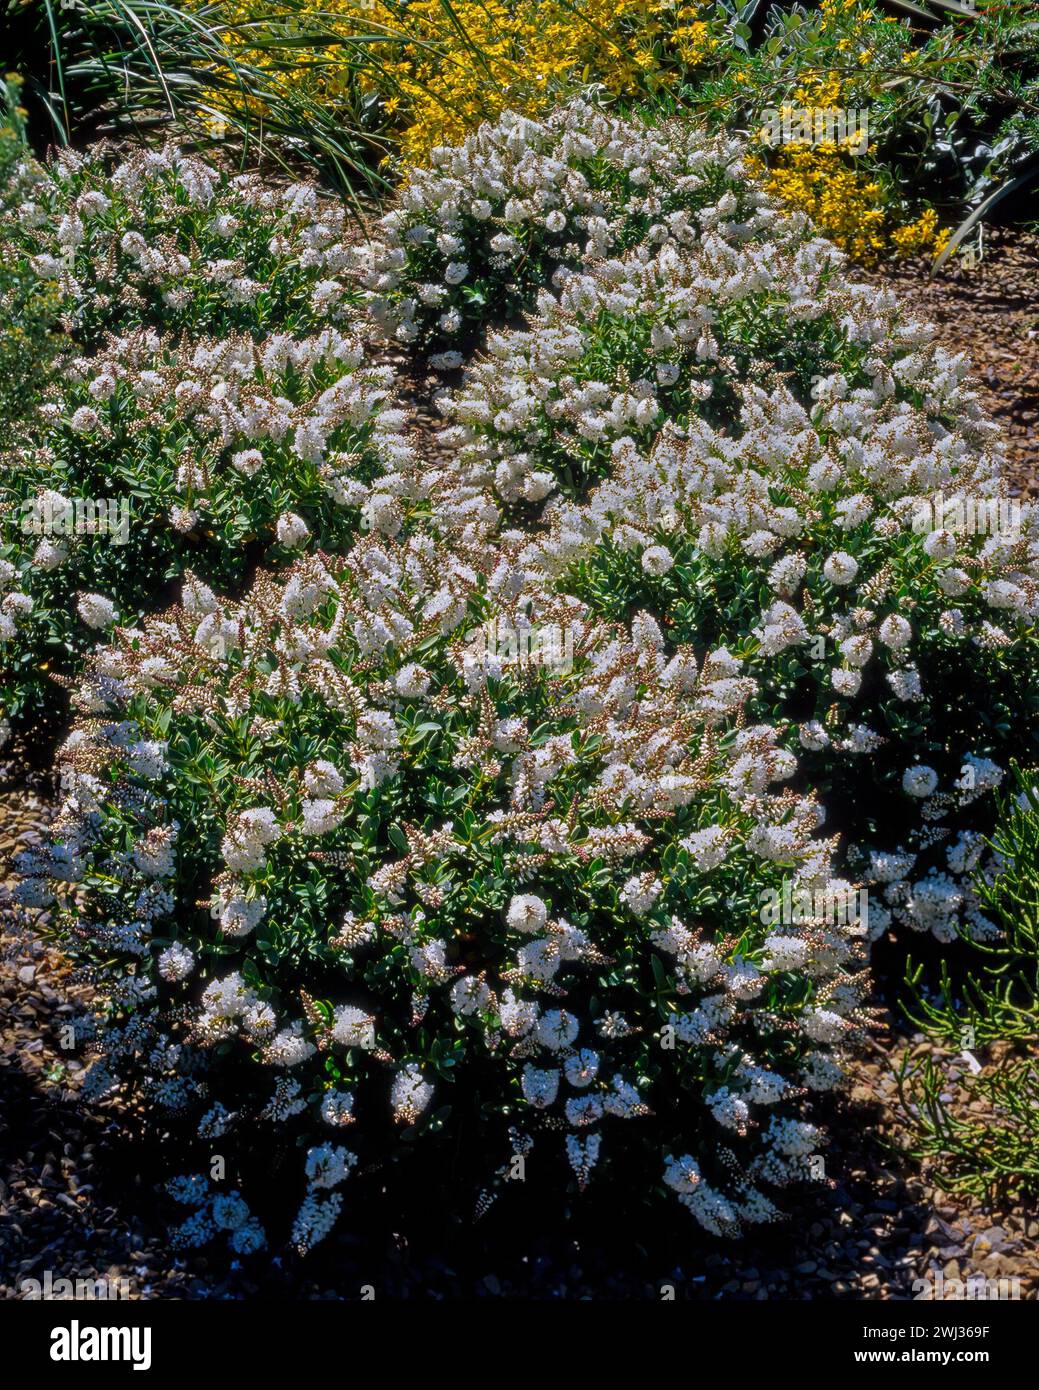 Hebe 'Pewter Dome' (Hebe albicans 'Pewter Dome') bushes with white flowers growing in English garden border in early Summer, England, UK. Stock Photo